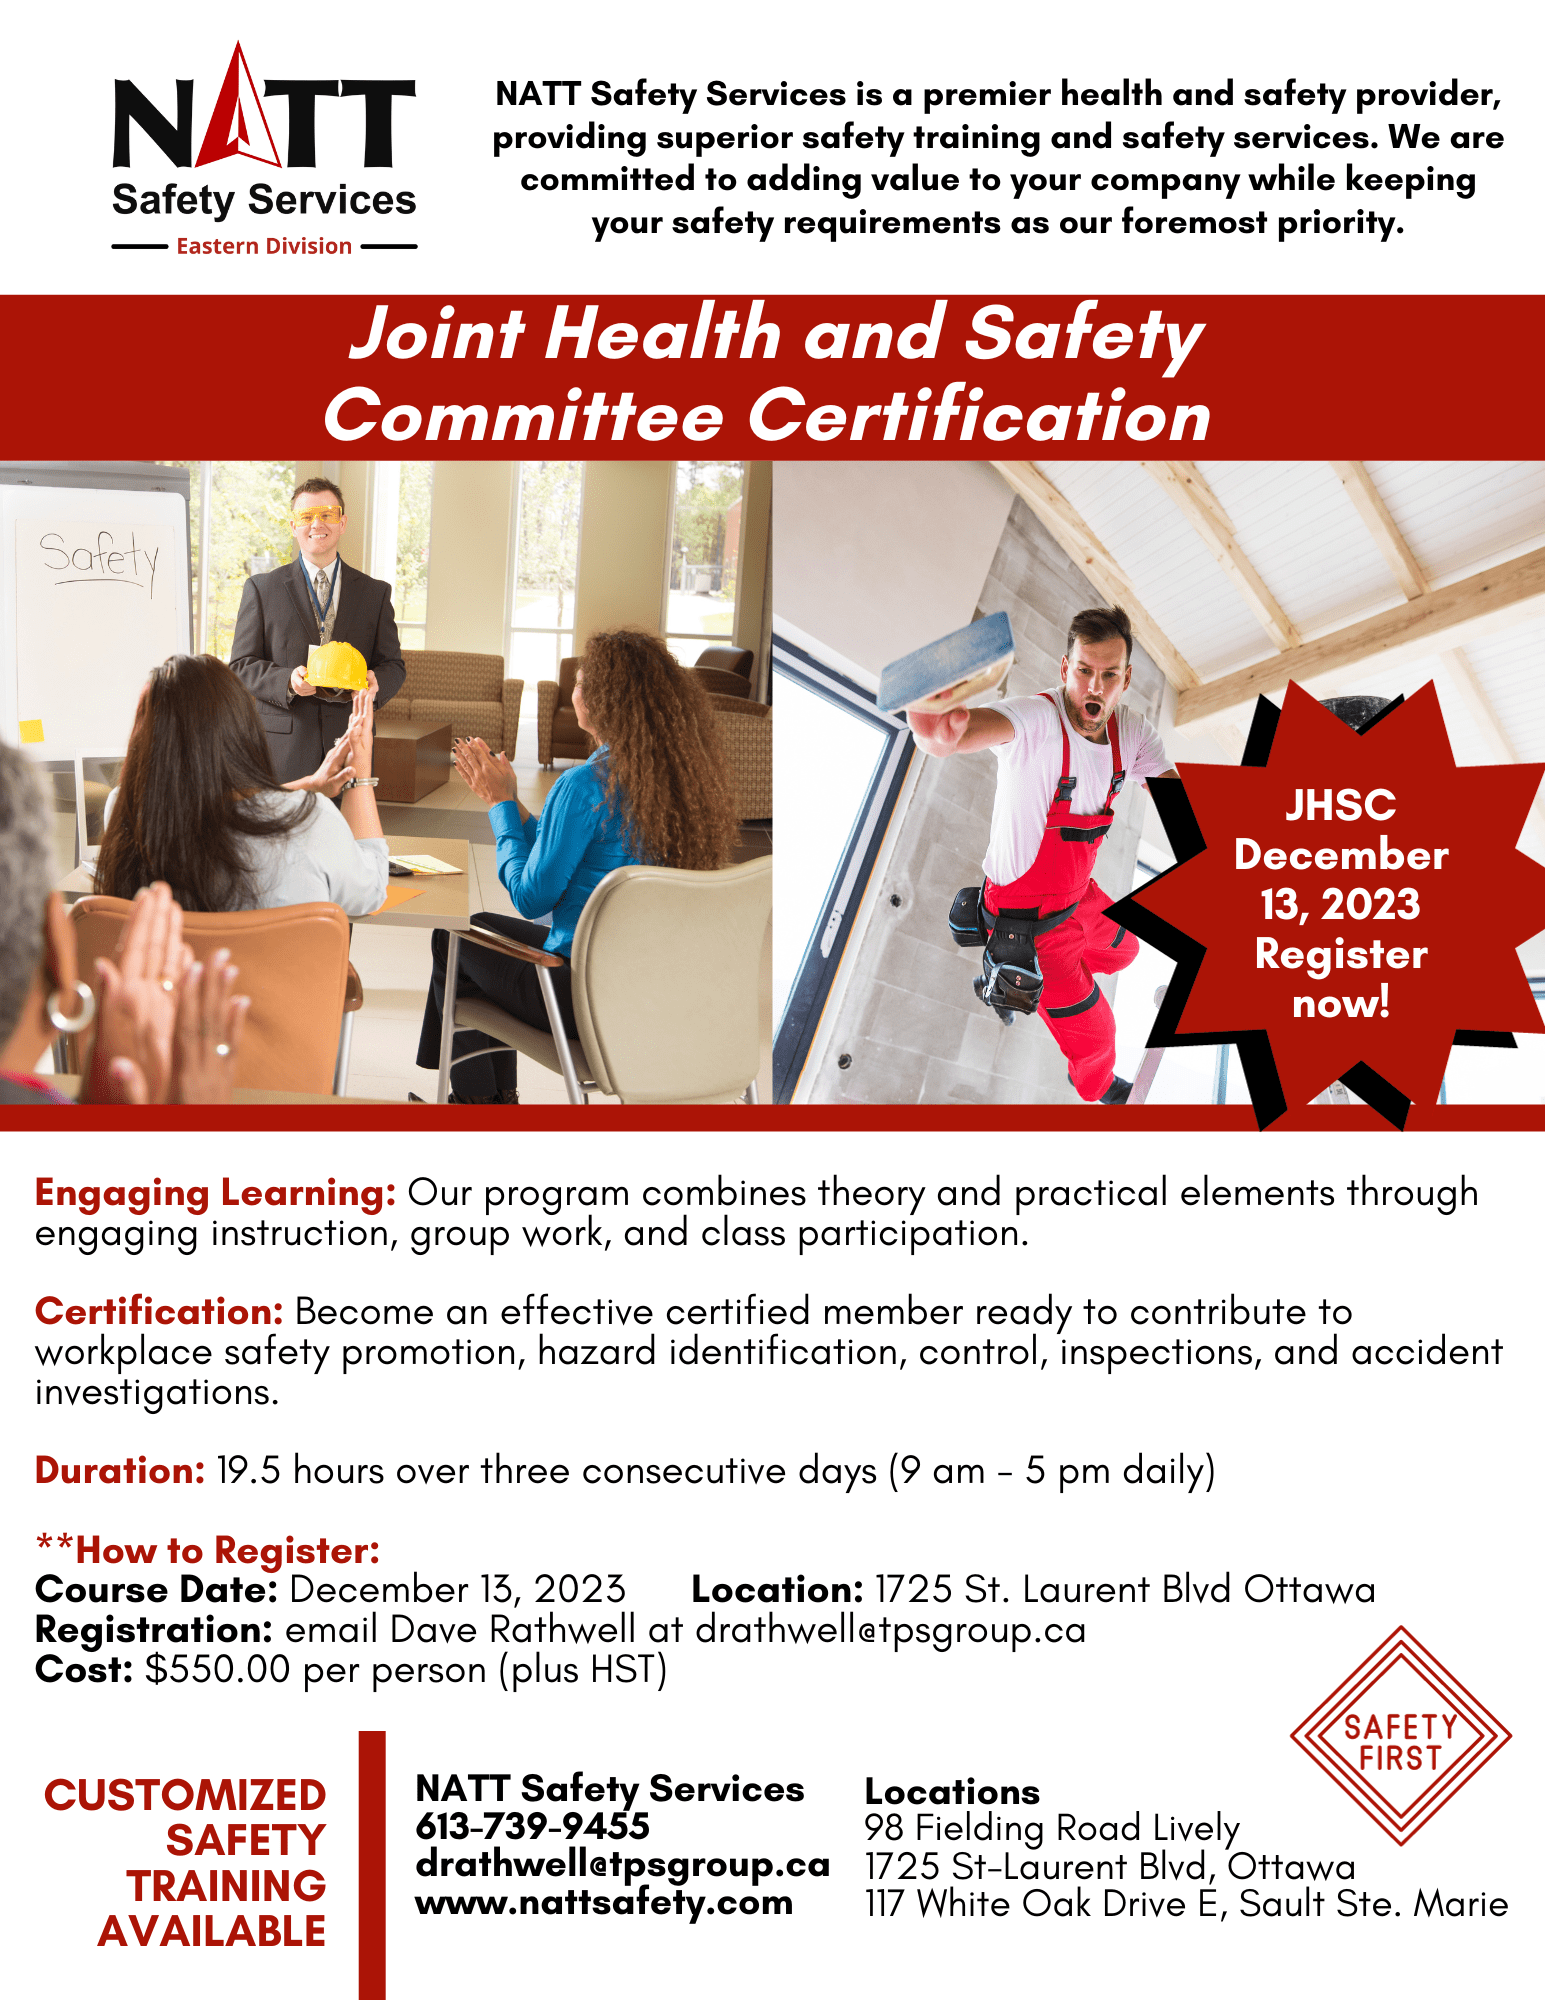 joint health and safety committee certification natt safety services